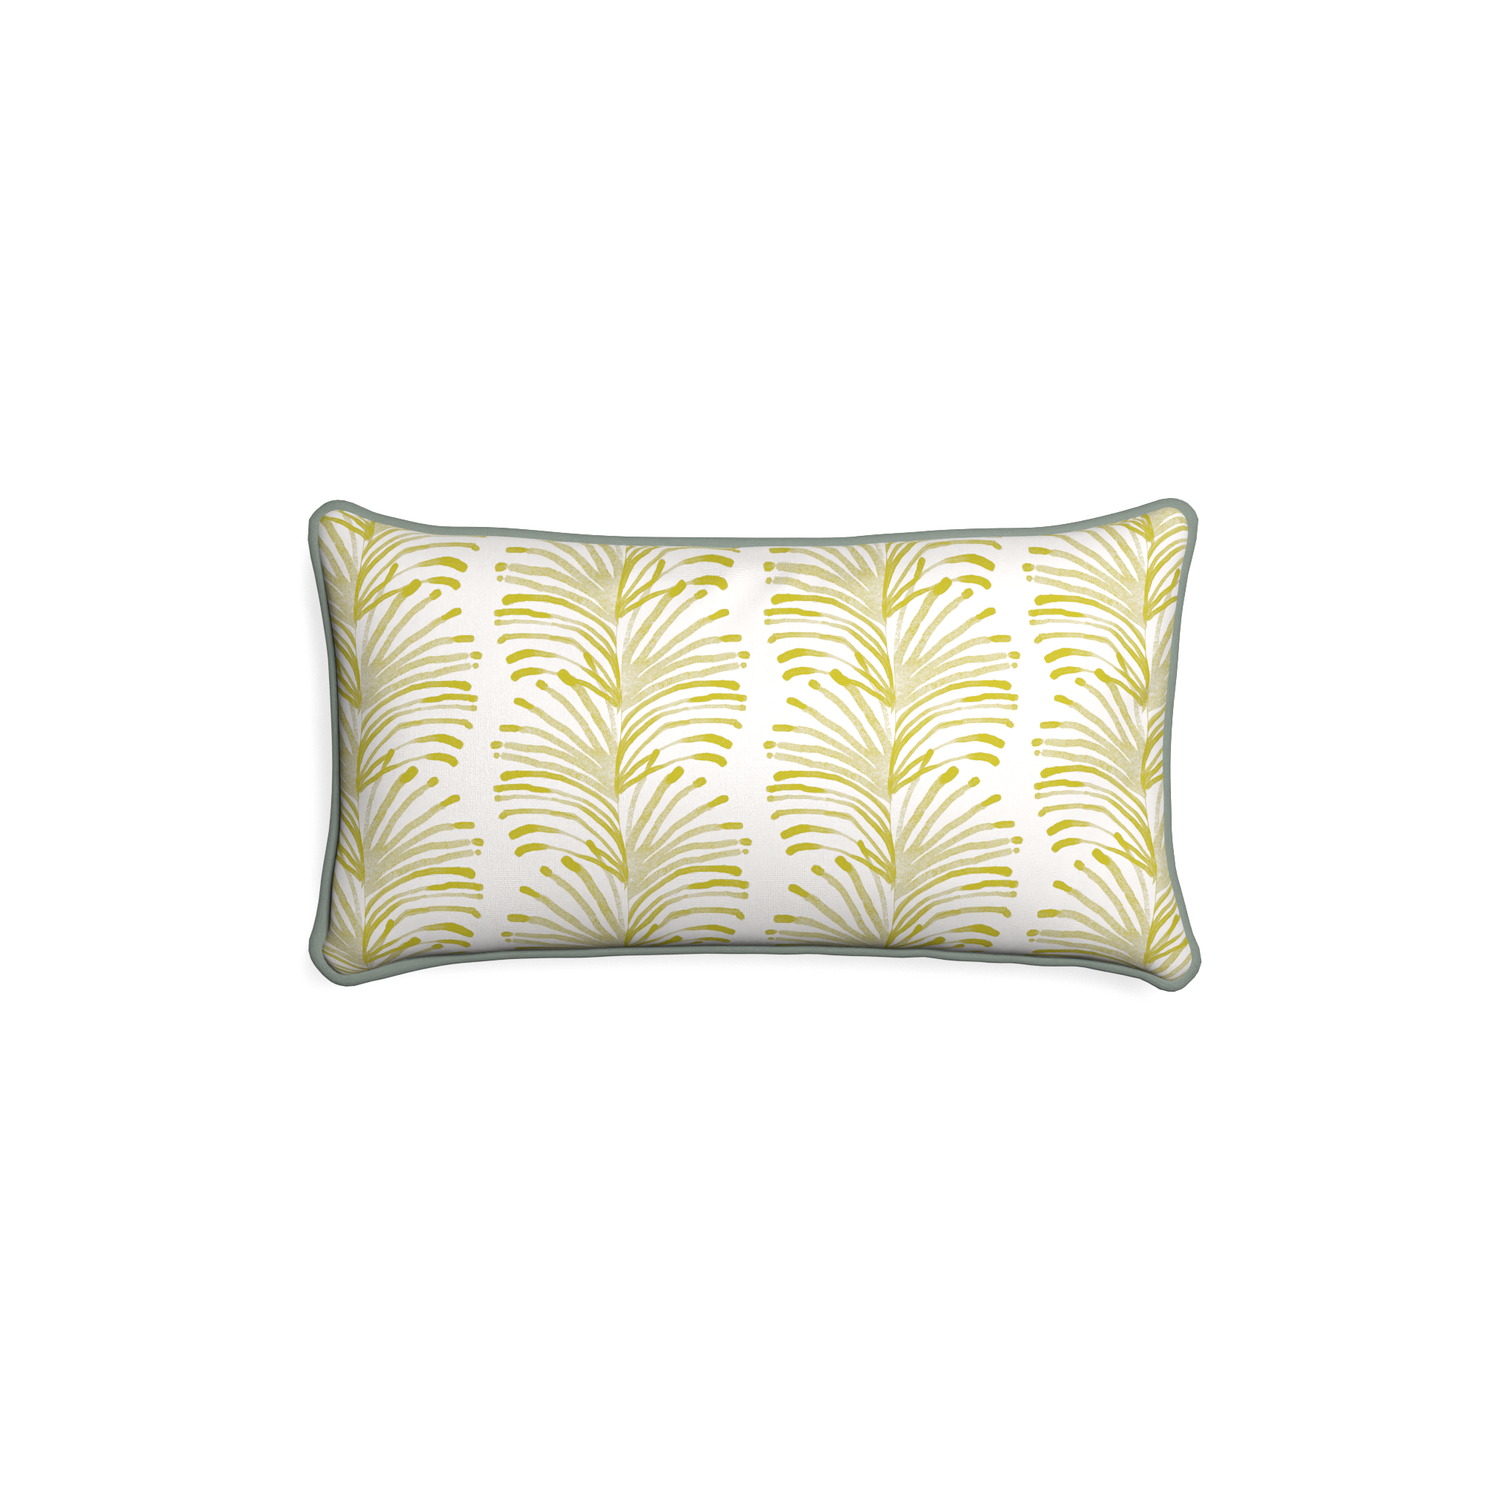 Petite-lumbar emma chartreuse custom yellow stripe chartreusepillow with sage piping on white background